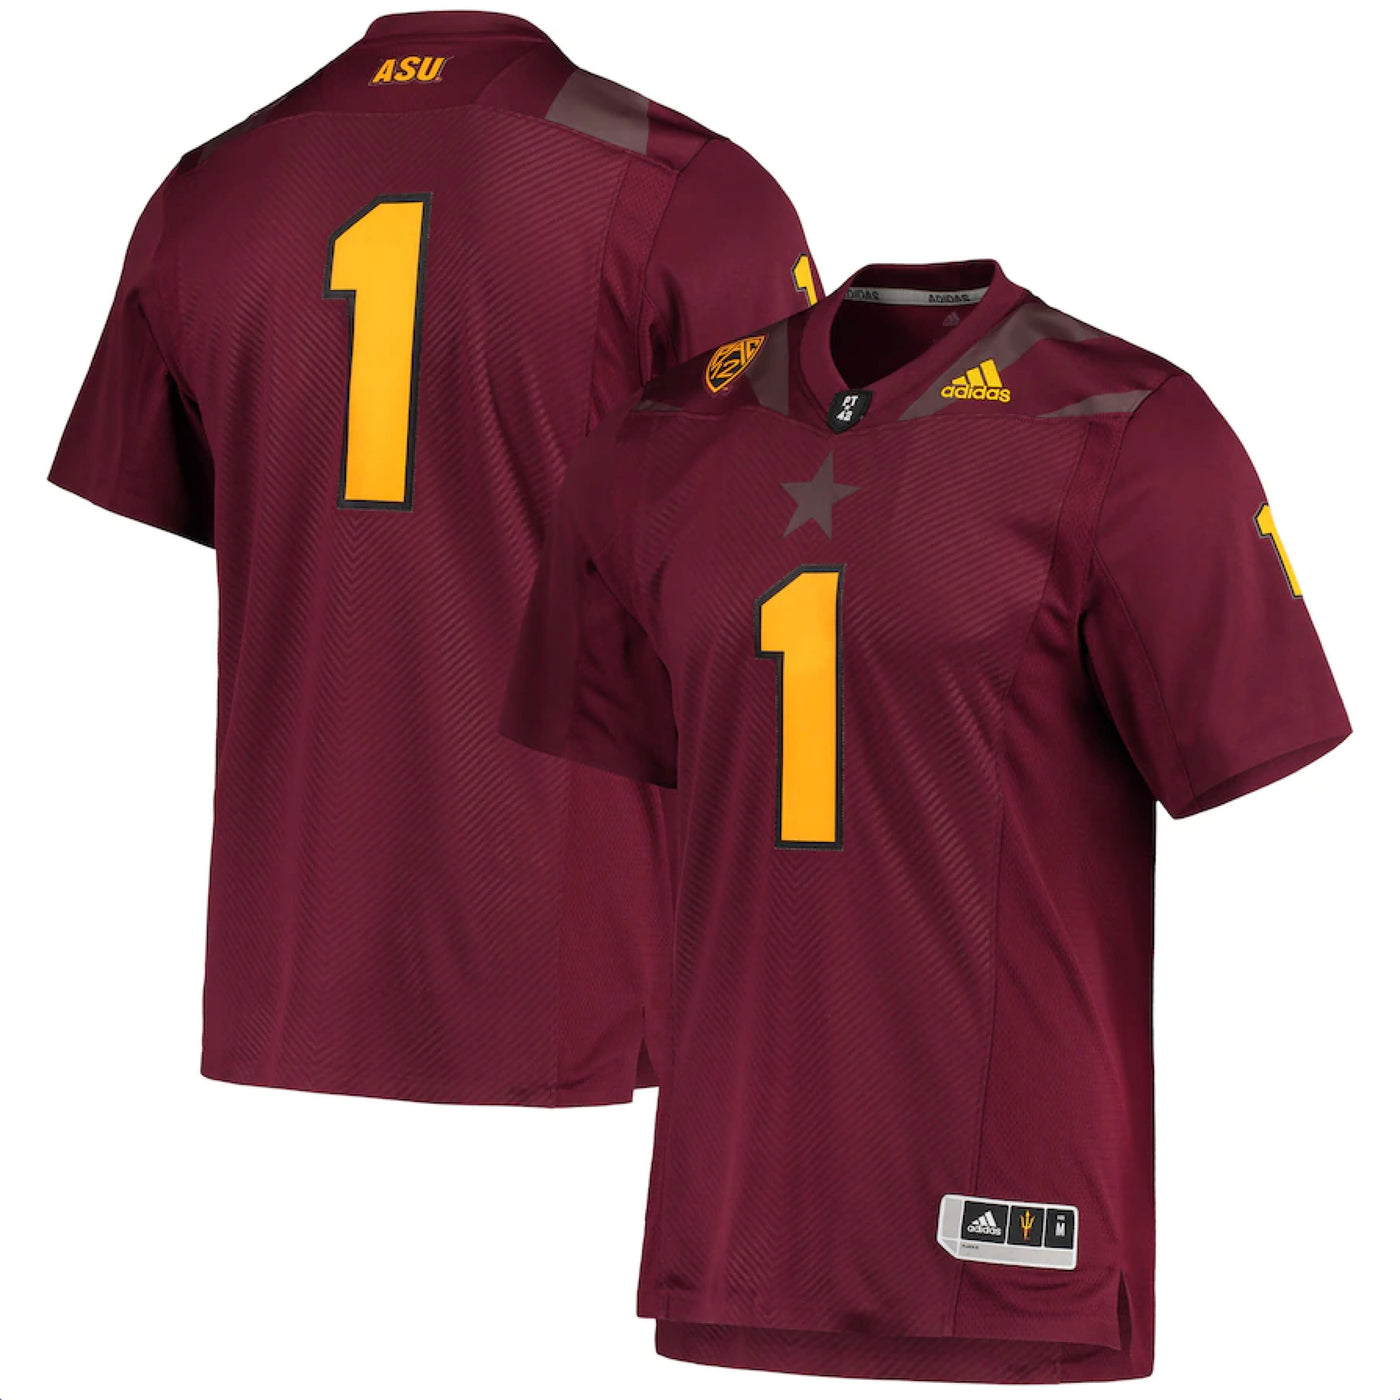 Back and front view of ASU maroon football jersey with Arizona State flag design on chest and shoulders and and #1